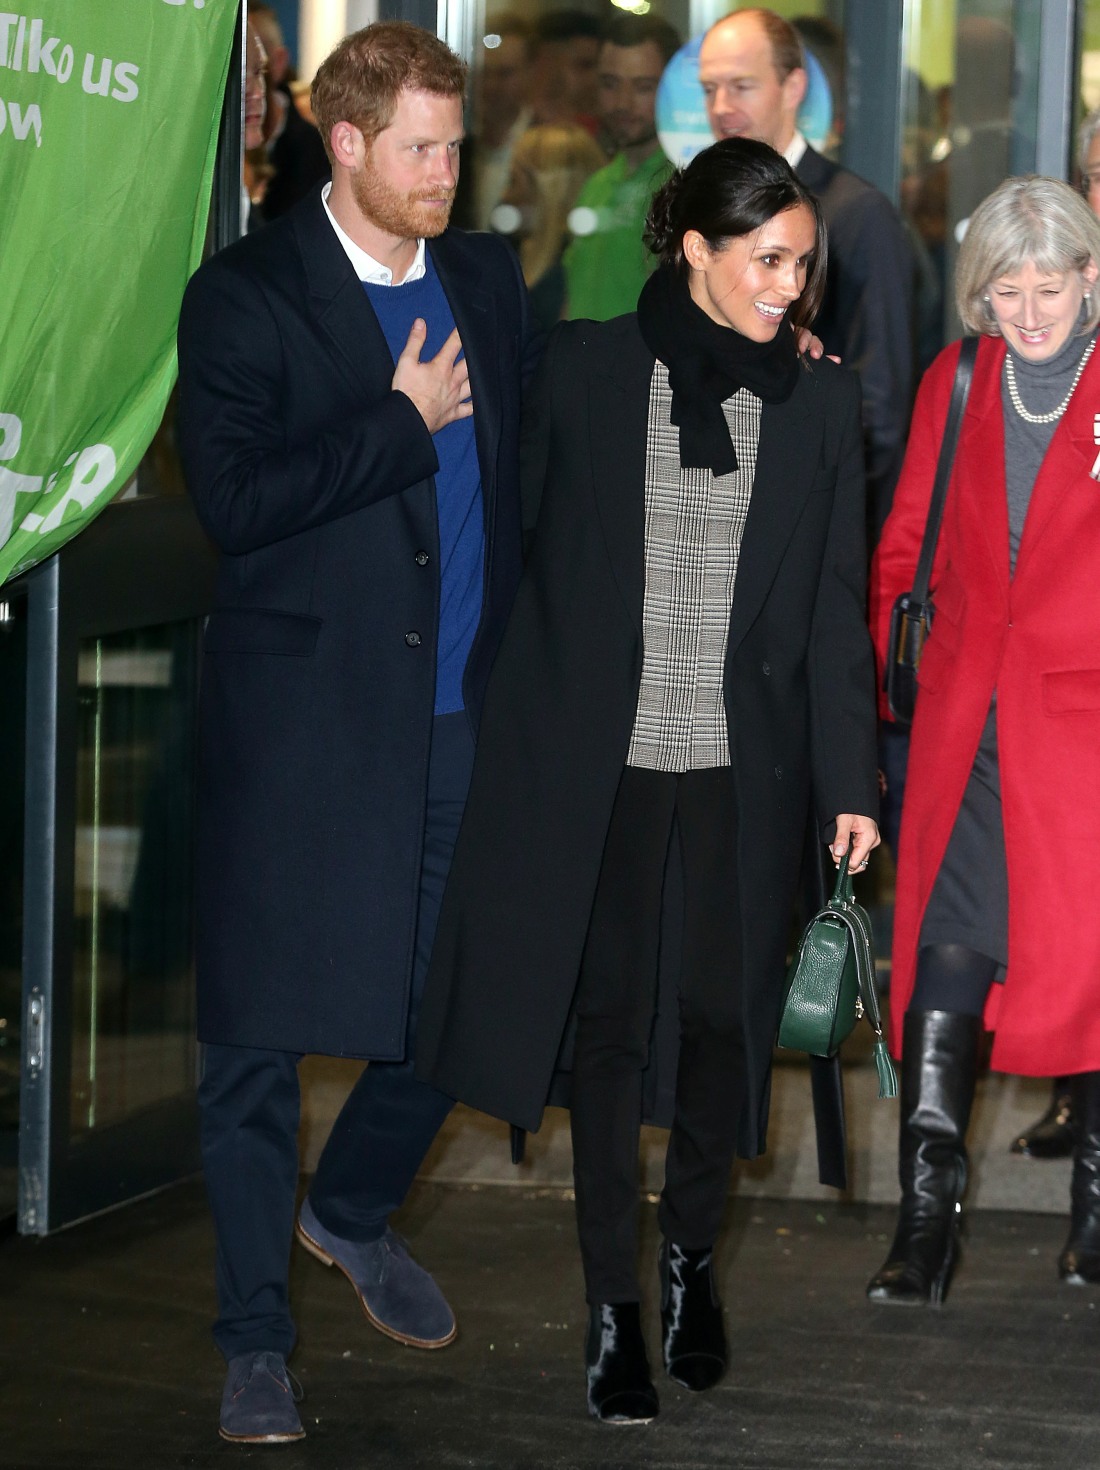 Meghan Markle and Prince Harry visit Cardiff